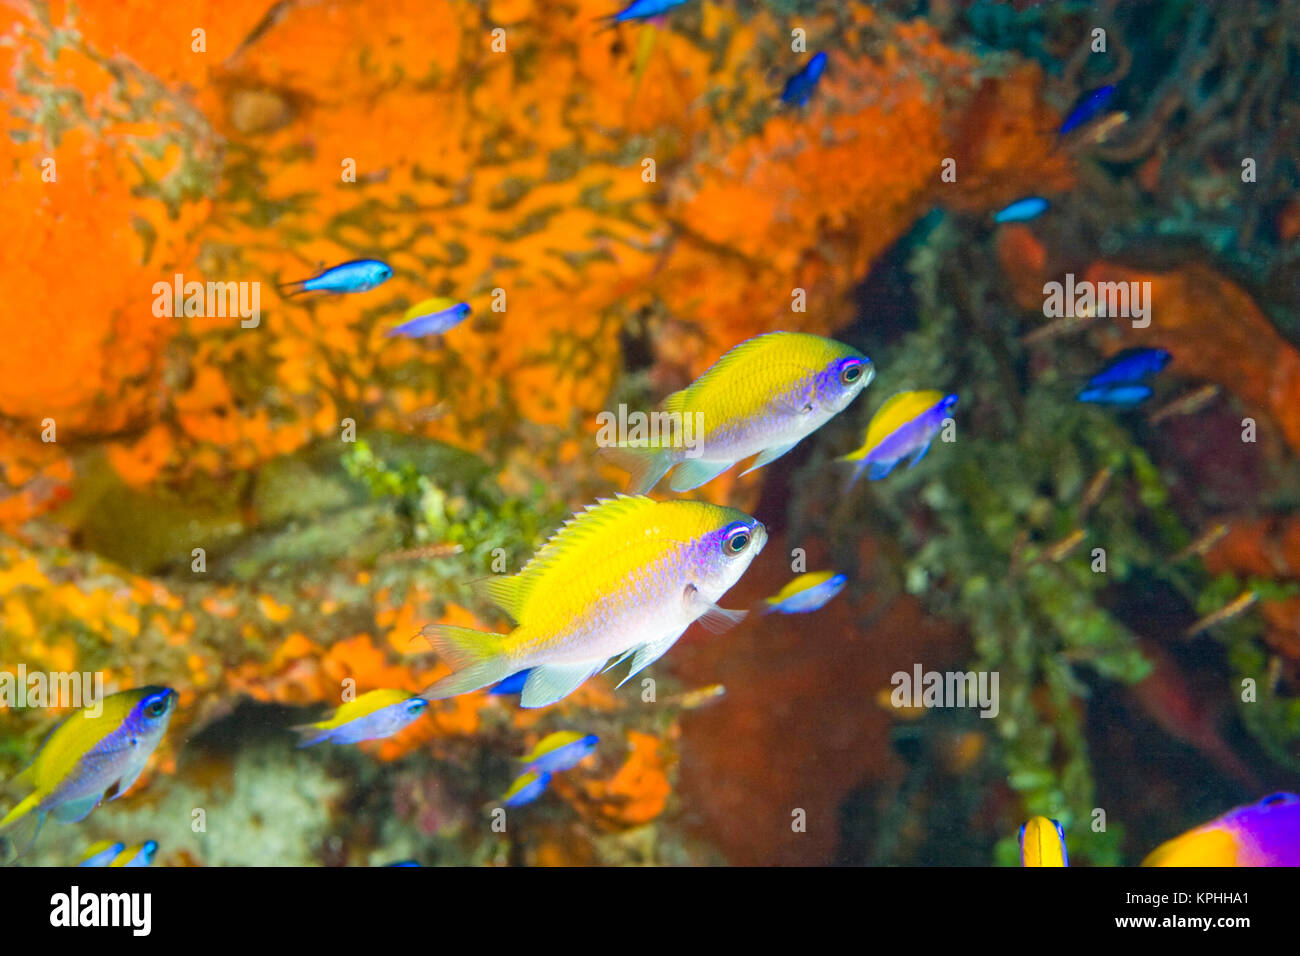 Sunshinefish (Chromis insolata) Hol Chan Marine Preserve, Belize Barrier Reef-2nd Largest in the World Stock Photo